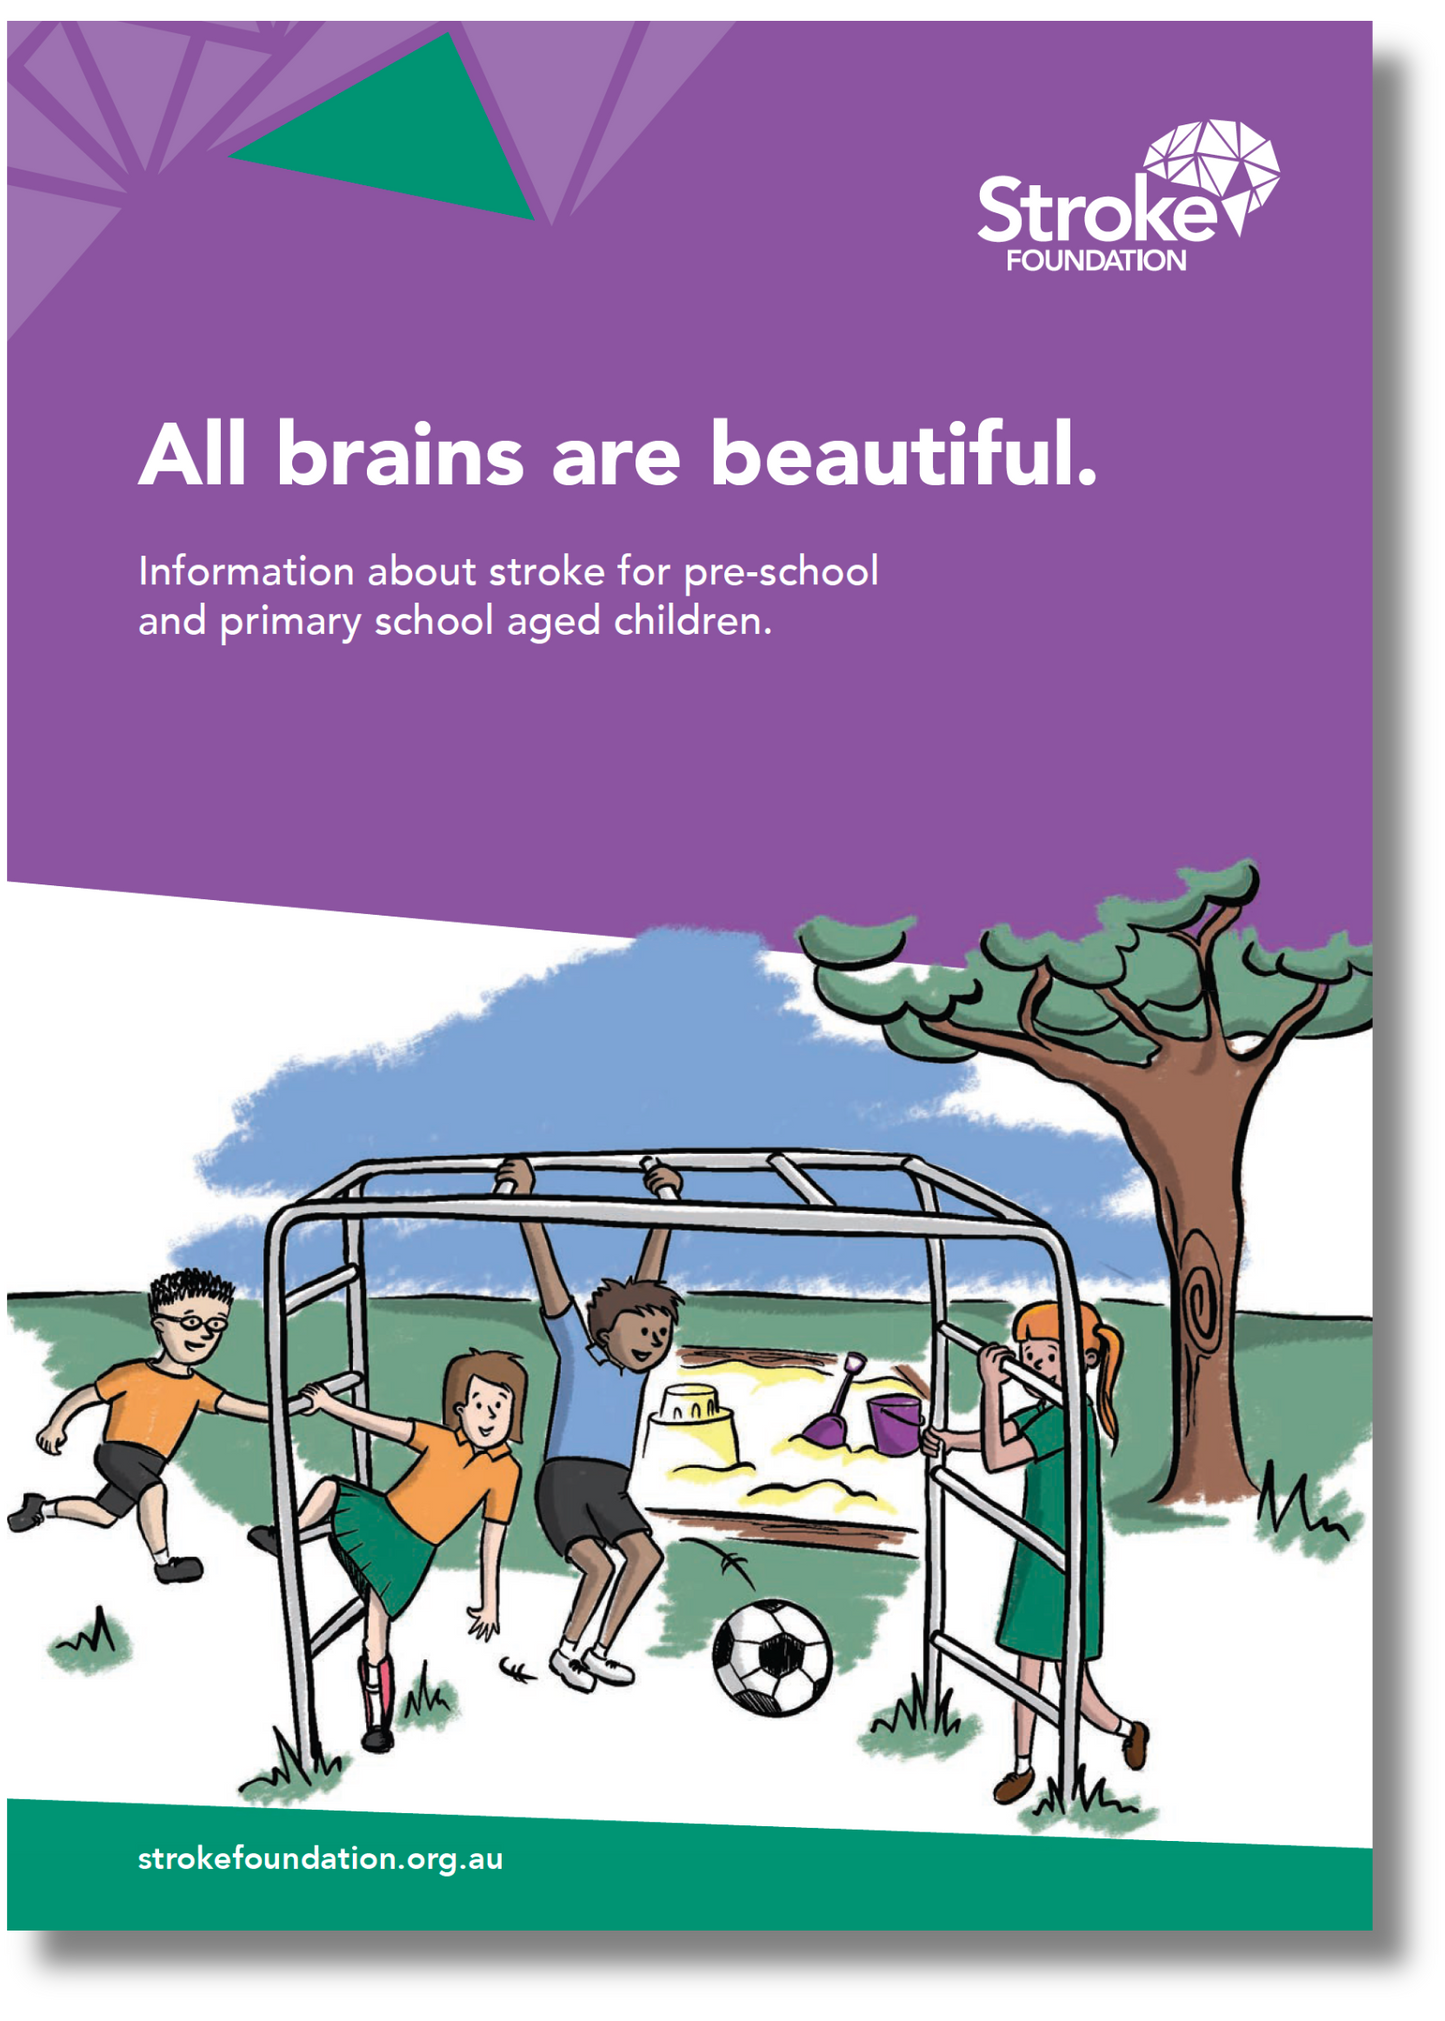 'All brains are beautiful' - Fact Sheet and Brochure